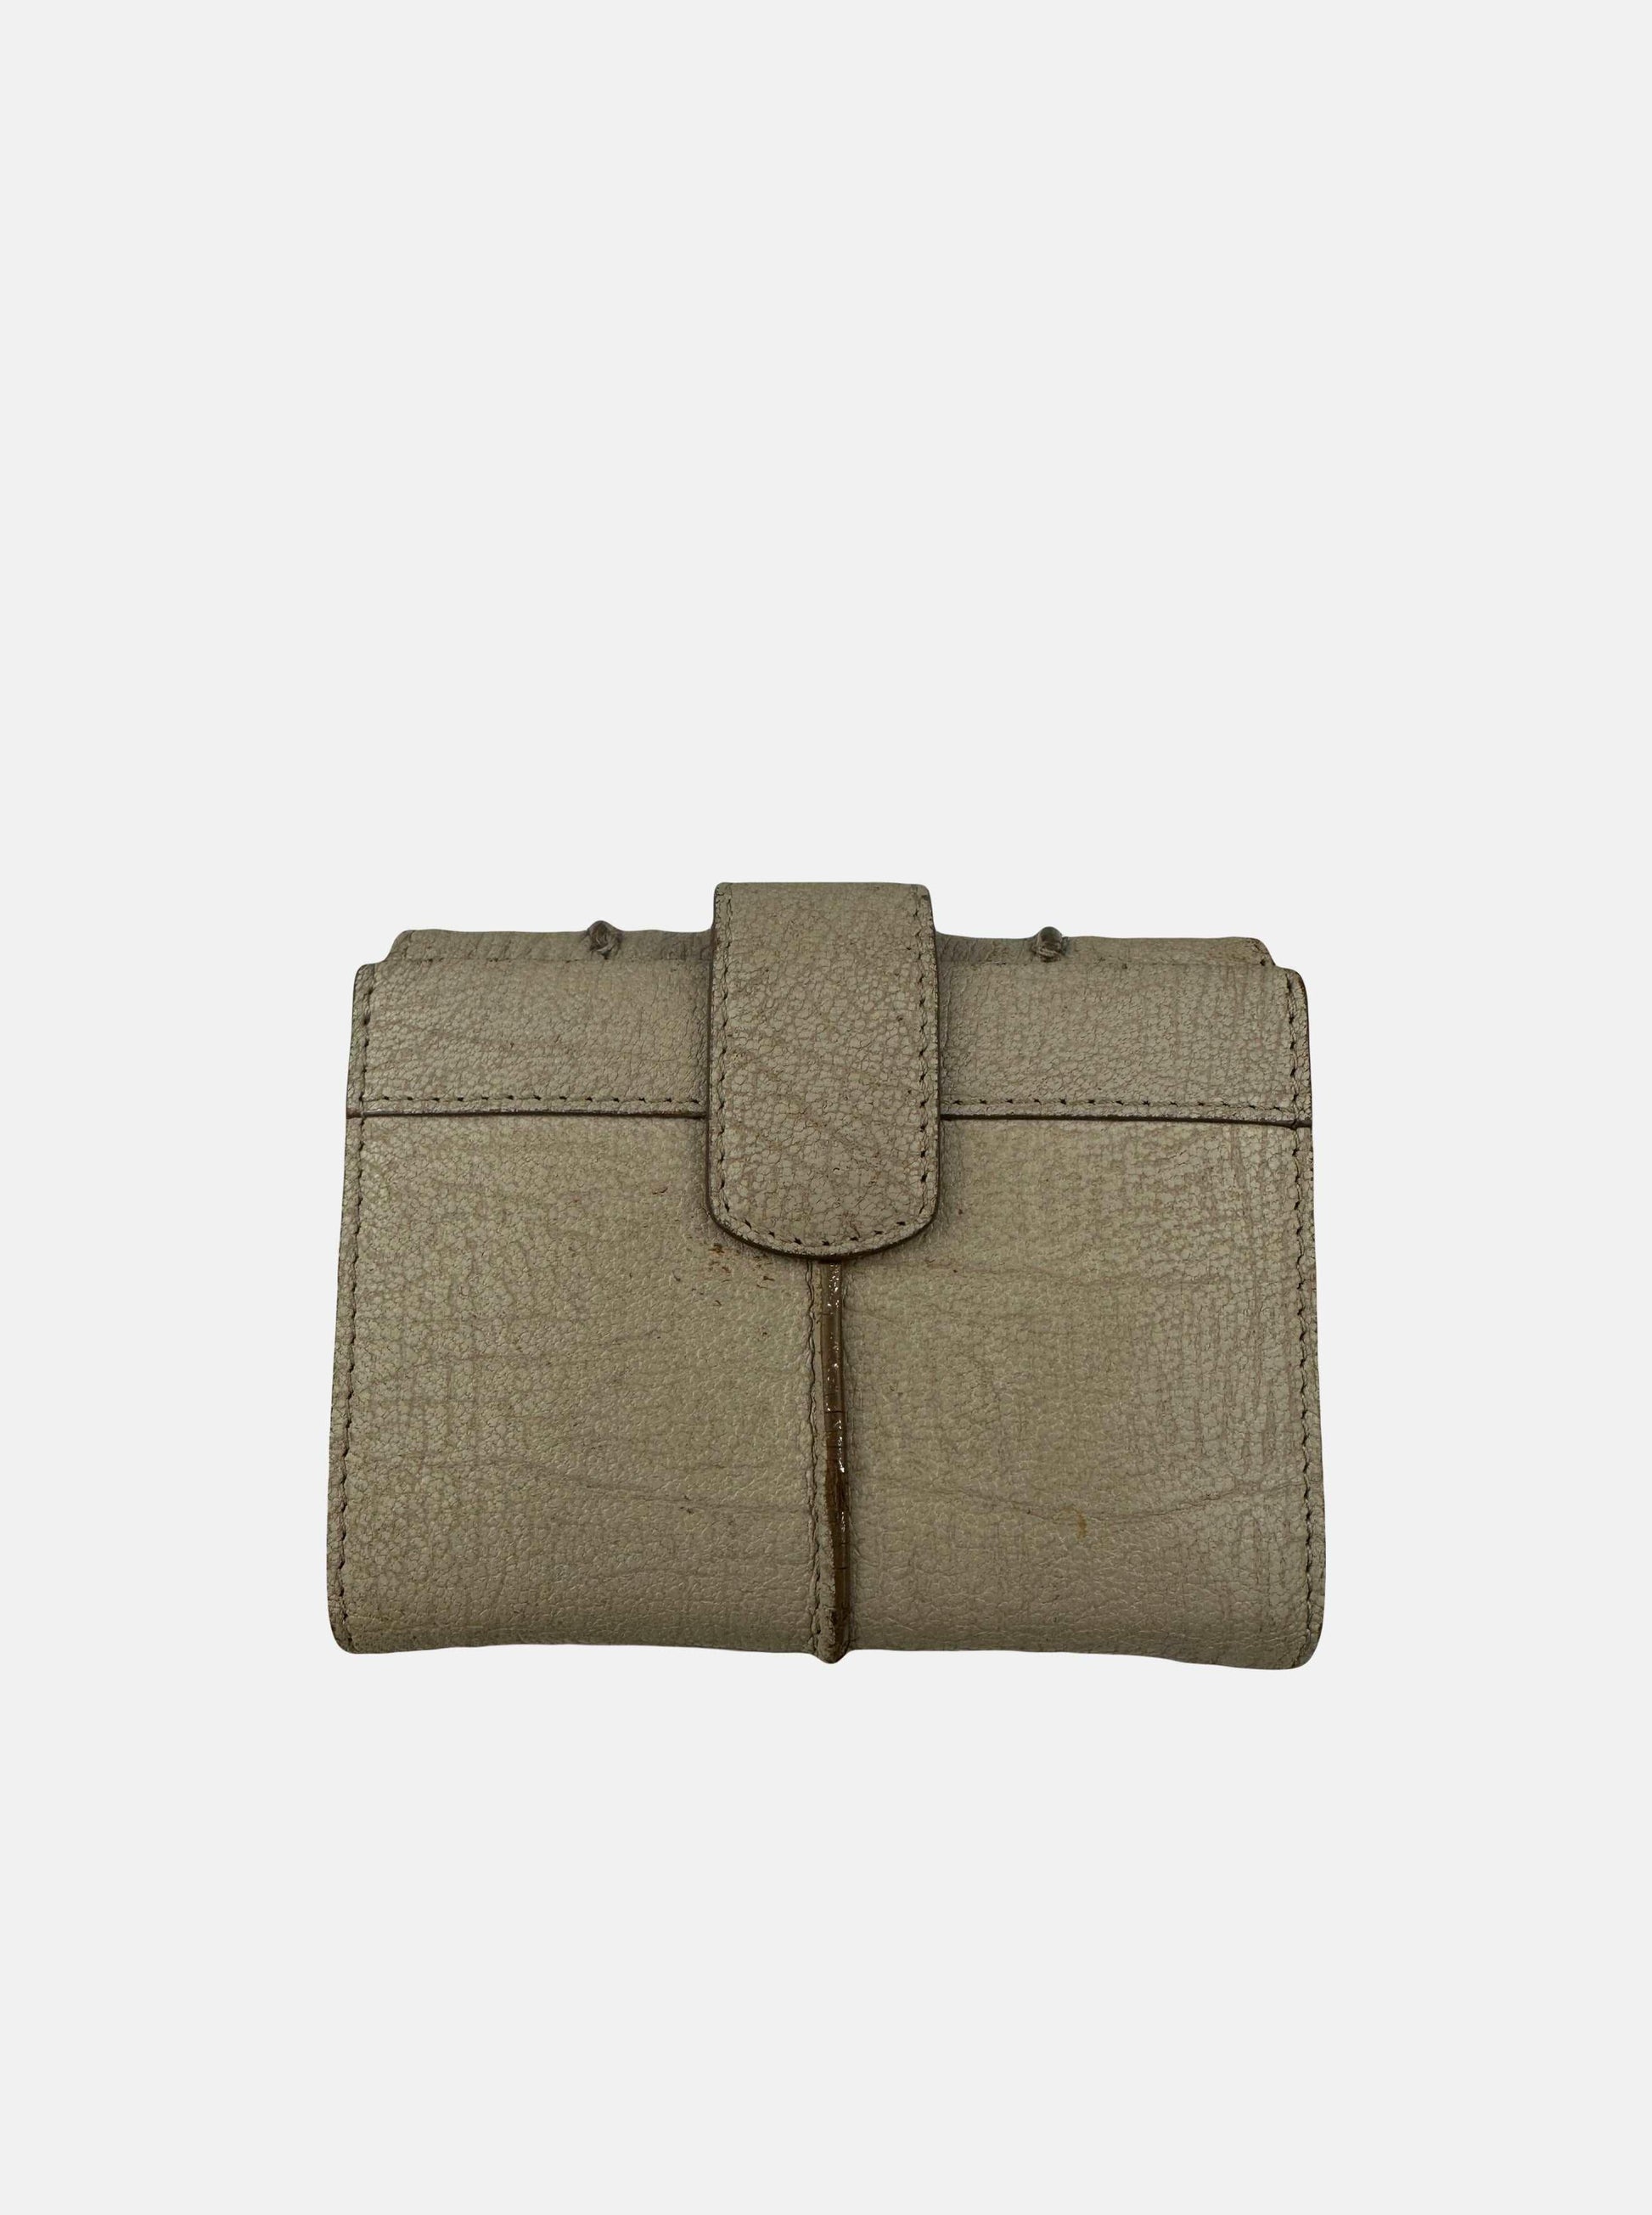 Cracked Stone Leather Dual-Sided Wallet